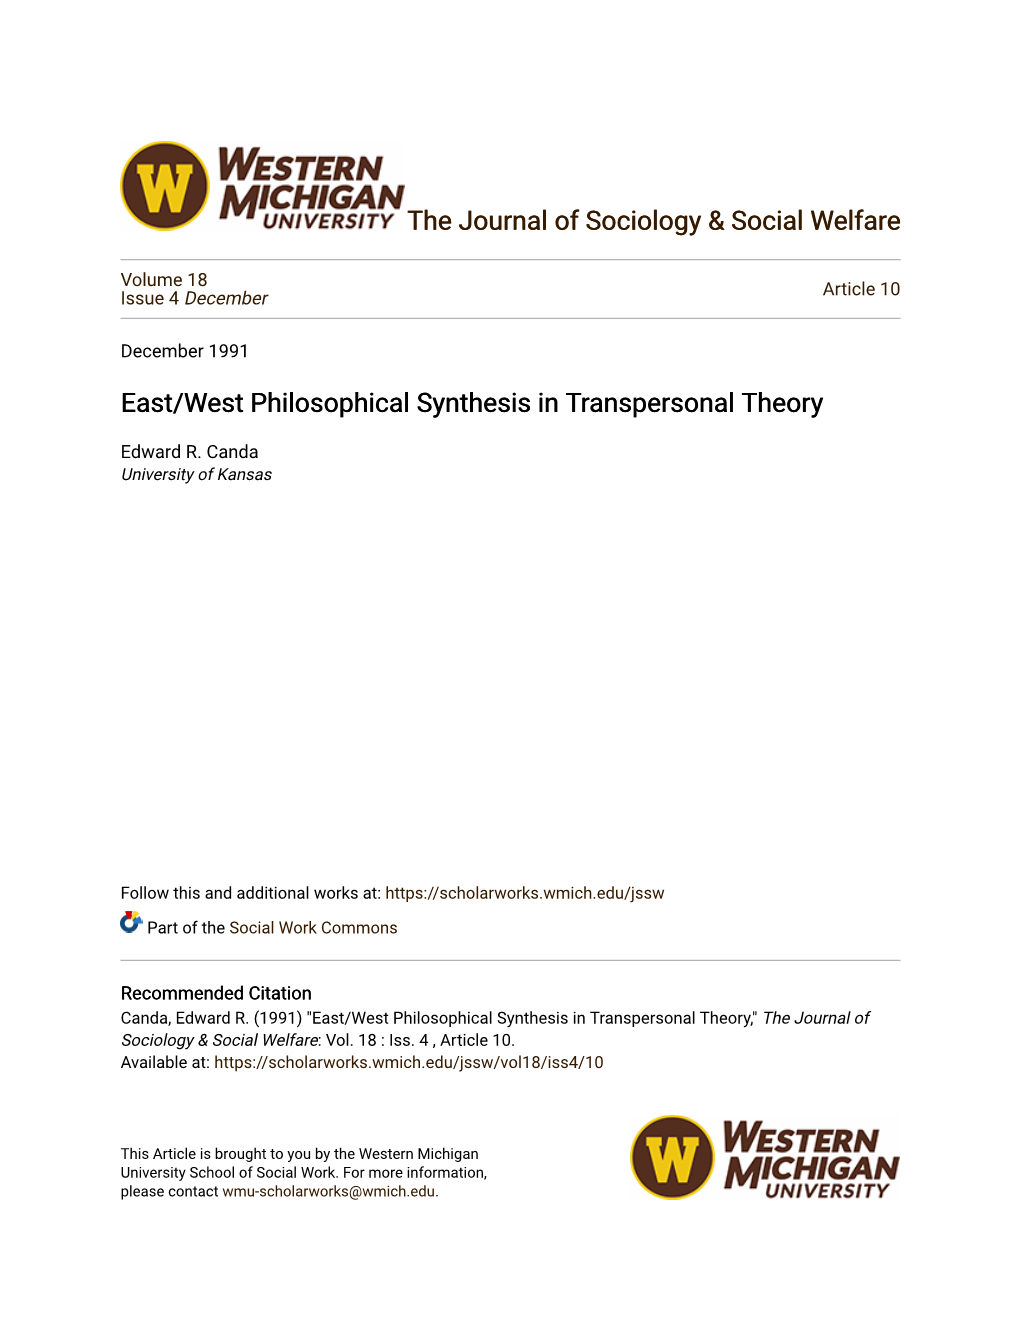 East/West Philosophical Synthesis in Transpersonal Theory